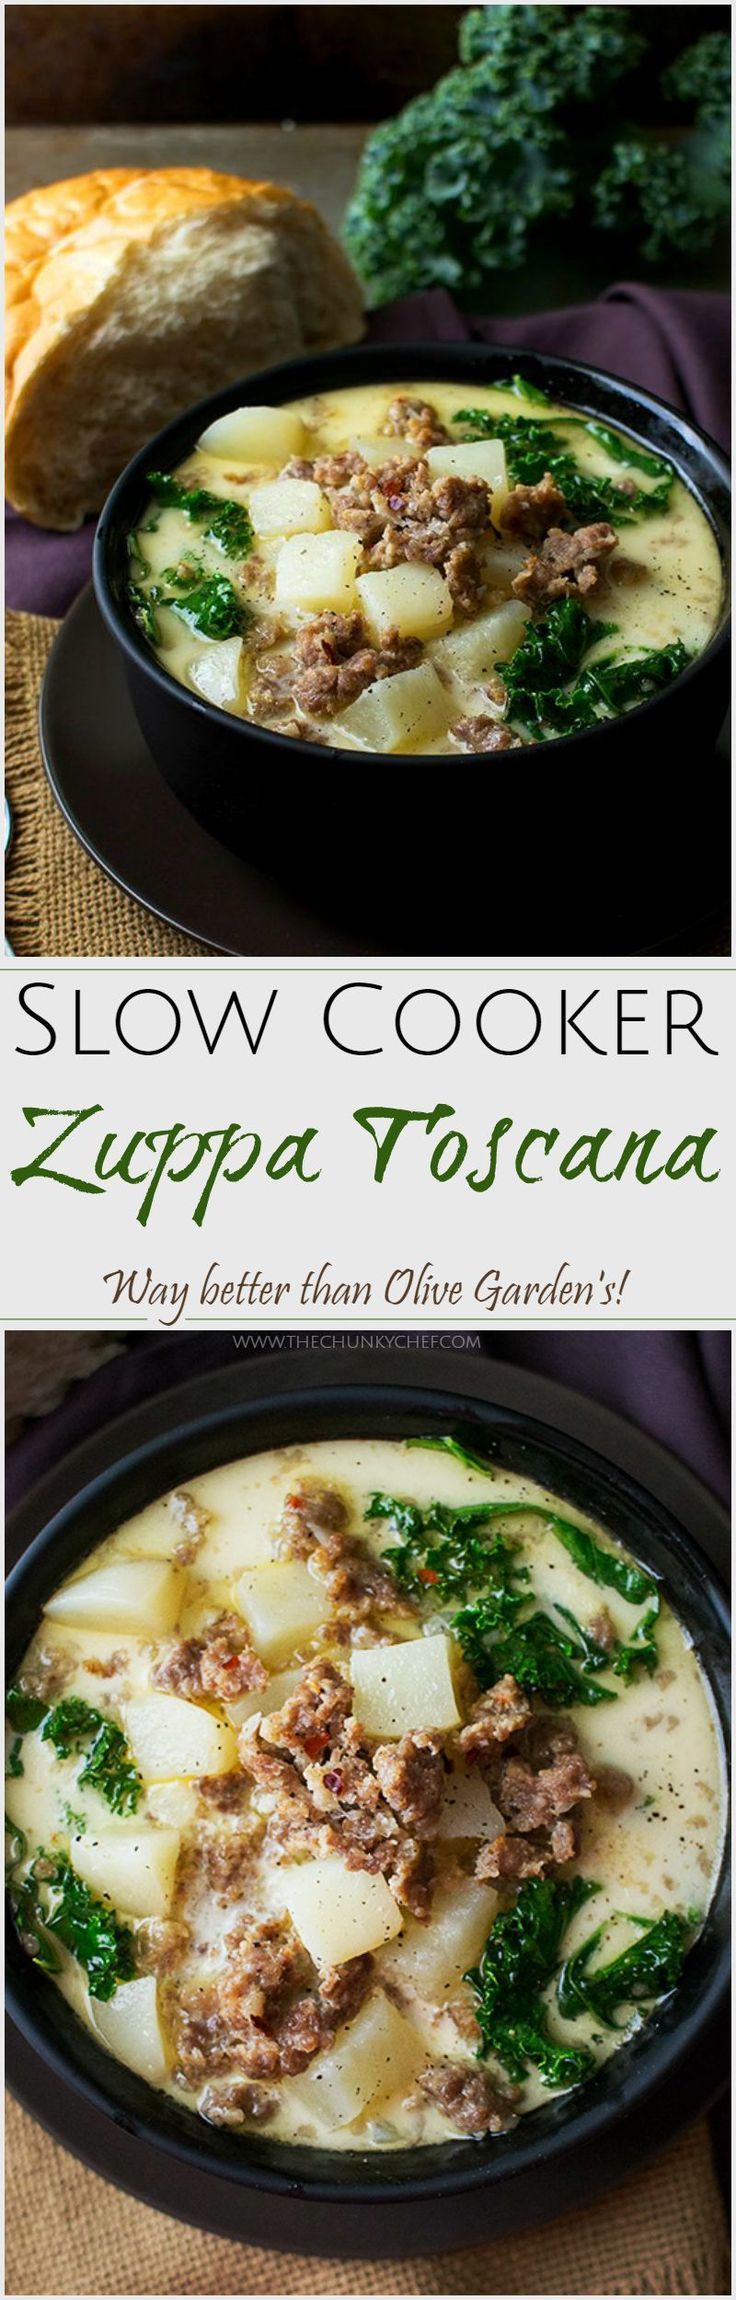 Slow Cooker Zuppa Toscana | The Chunky Chef | The classic zuppa toscana soup, in slow cooker form! It tastes WAY better than Olive